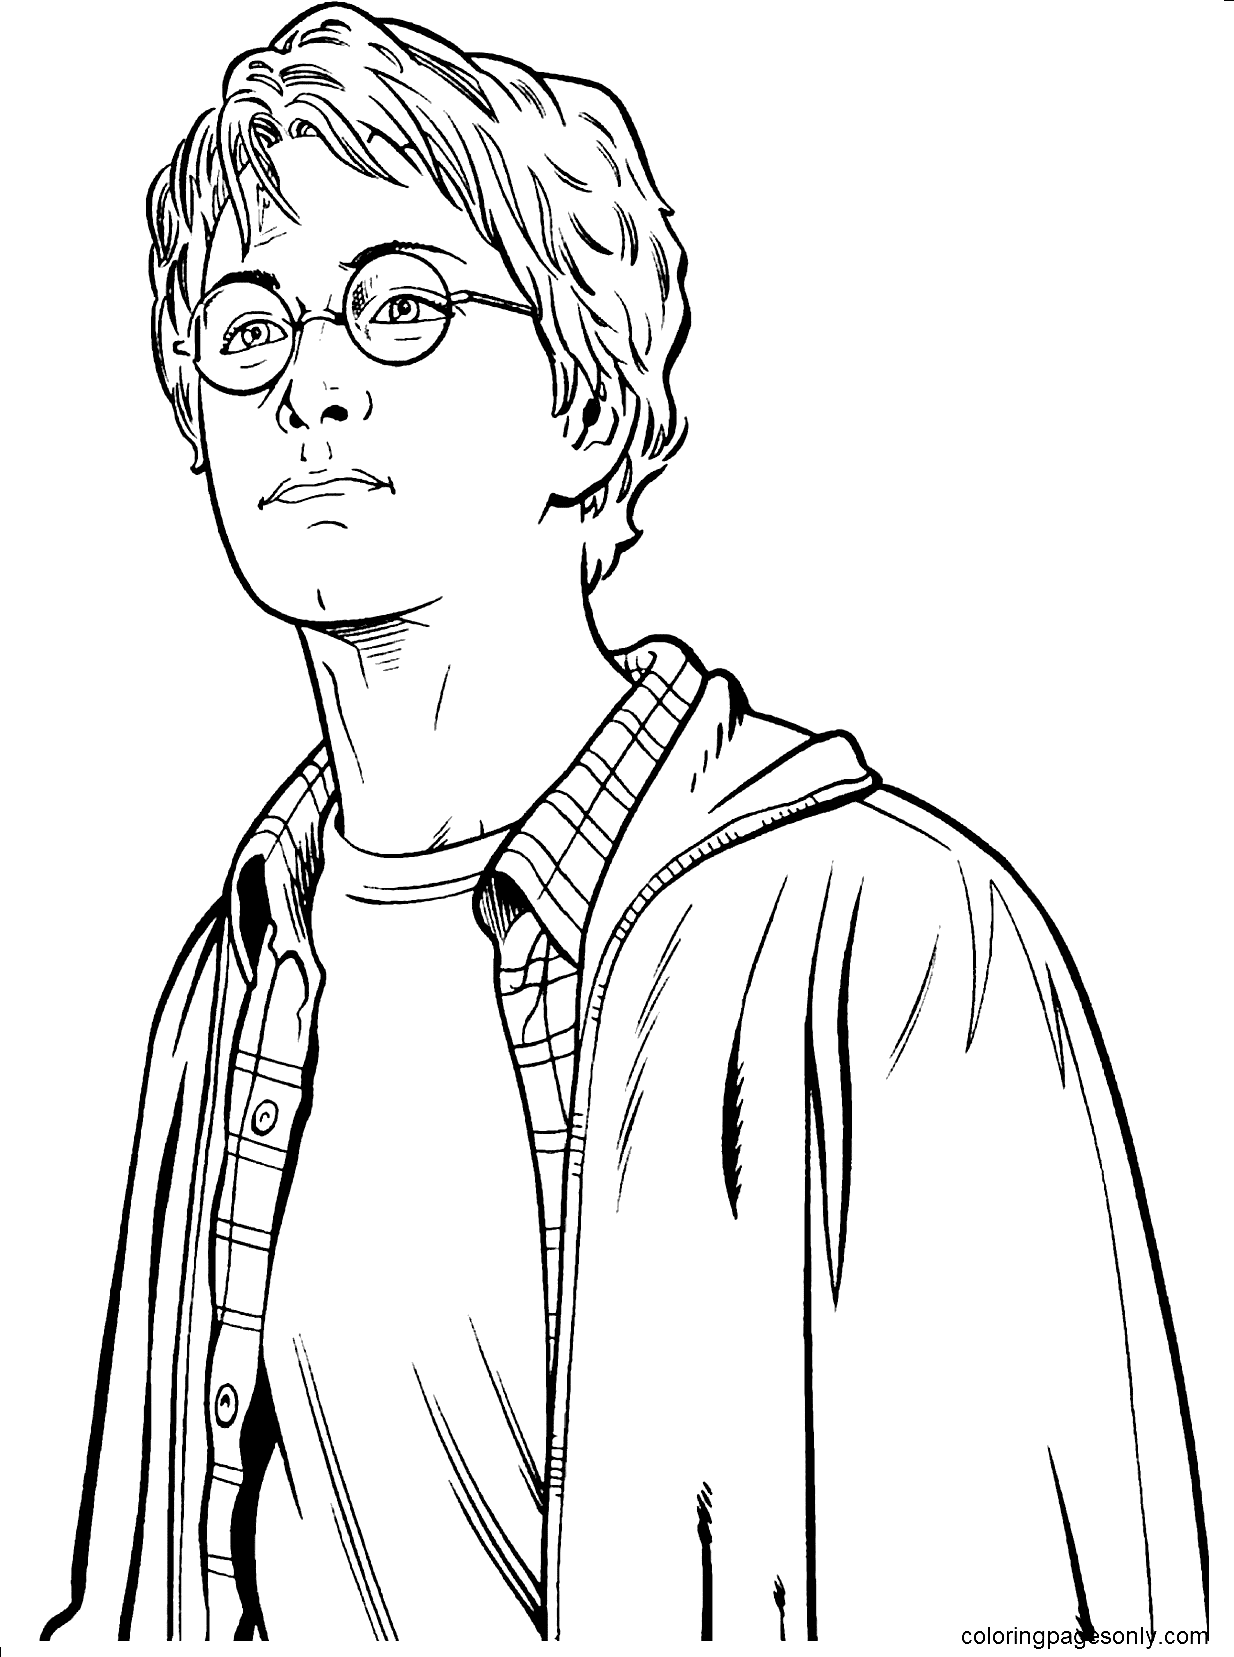 44 Harry Potter Coloring Pages (Free PDF Printables)  Harry potter  coloring pages, Harry potter coloring book, Harry potter colors